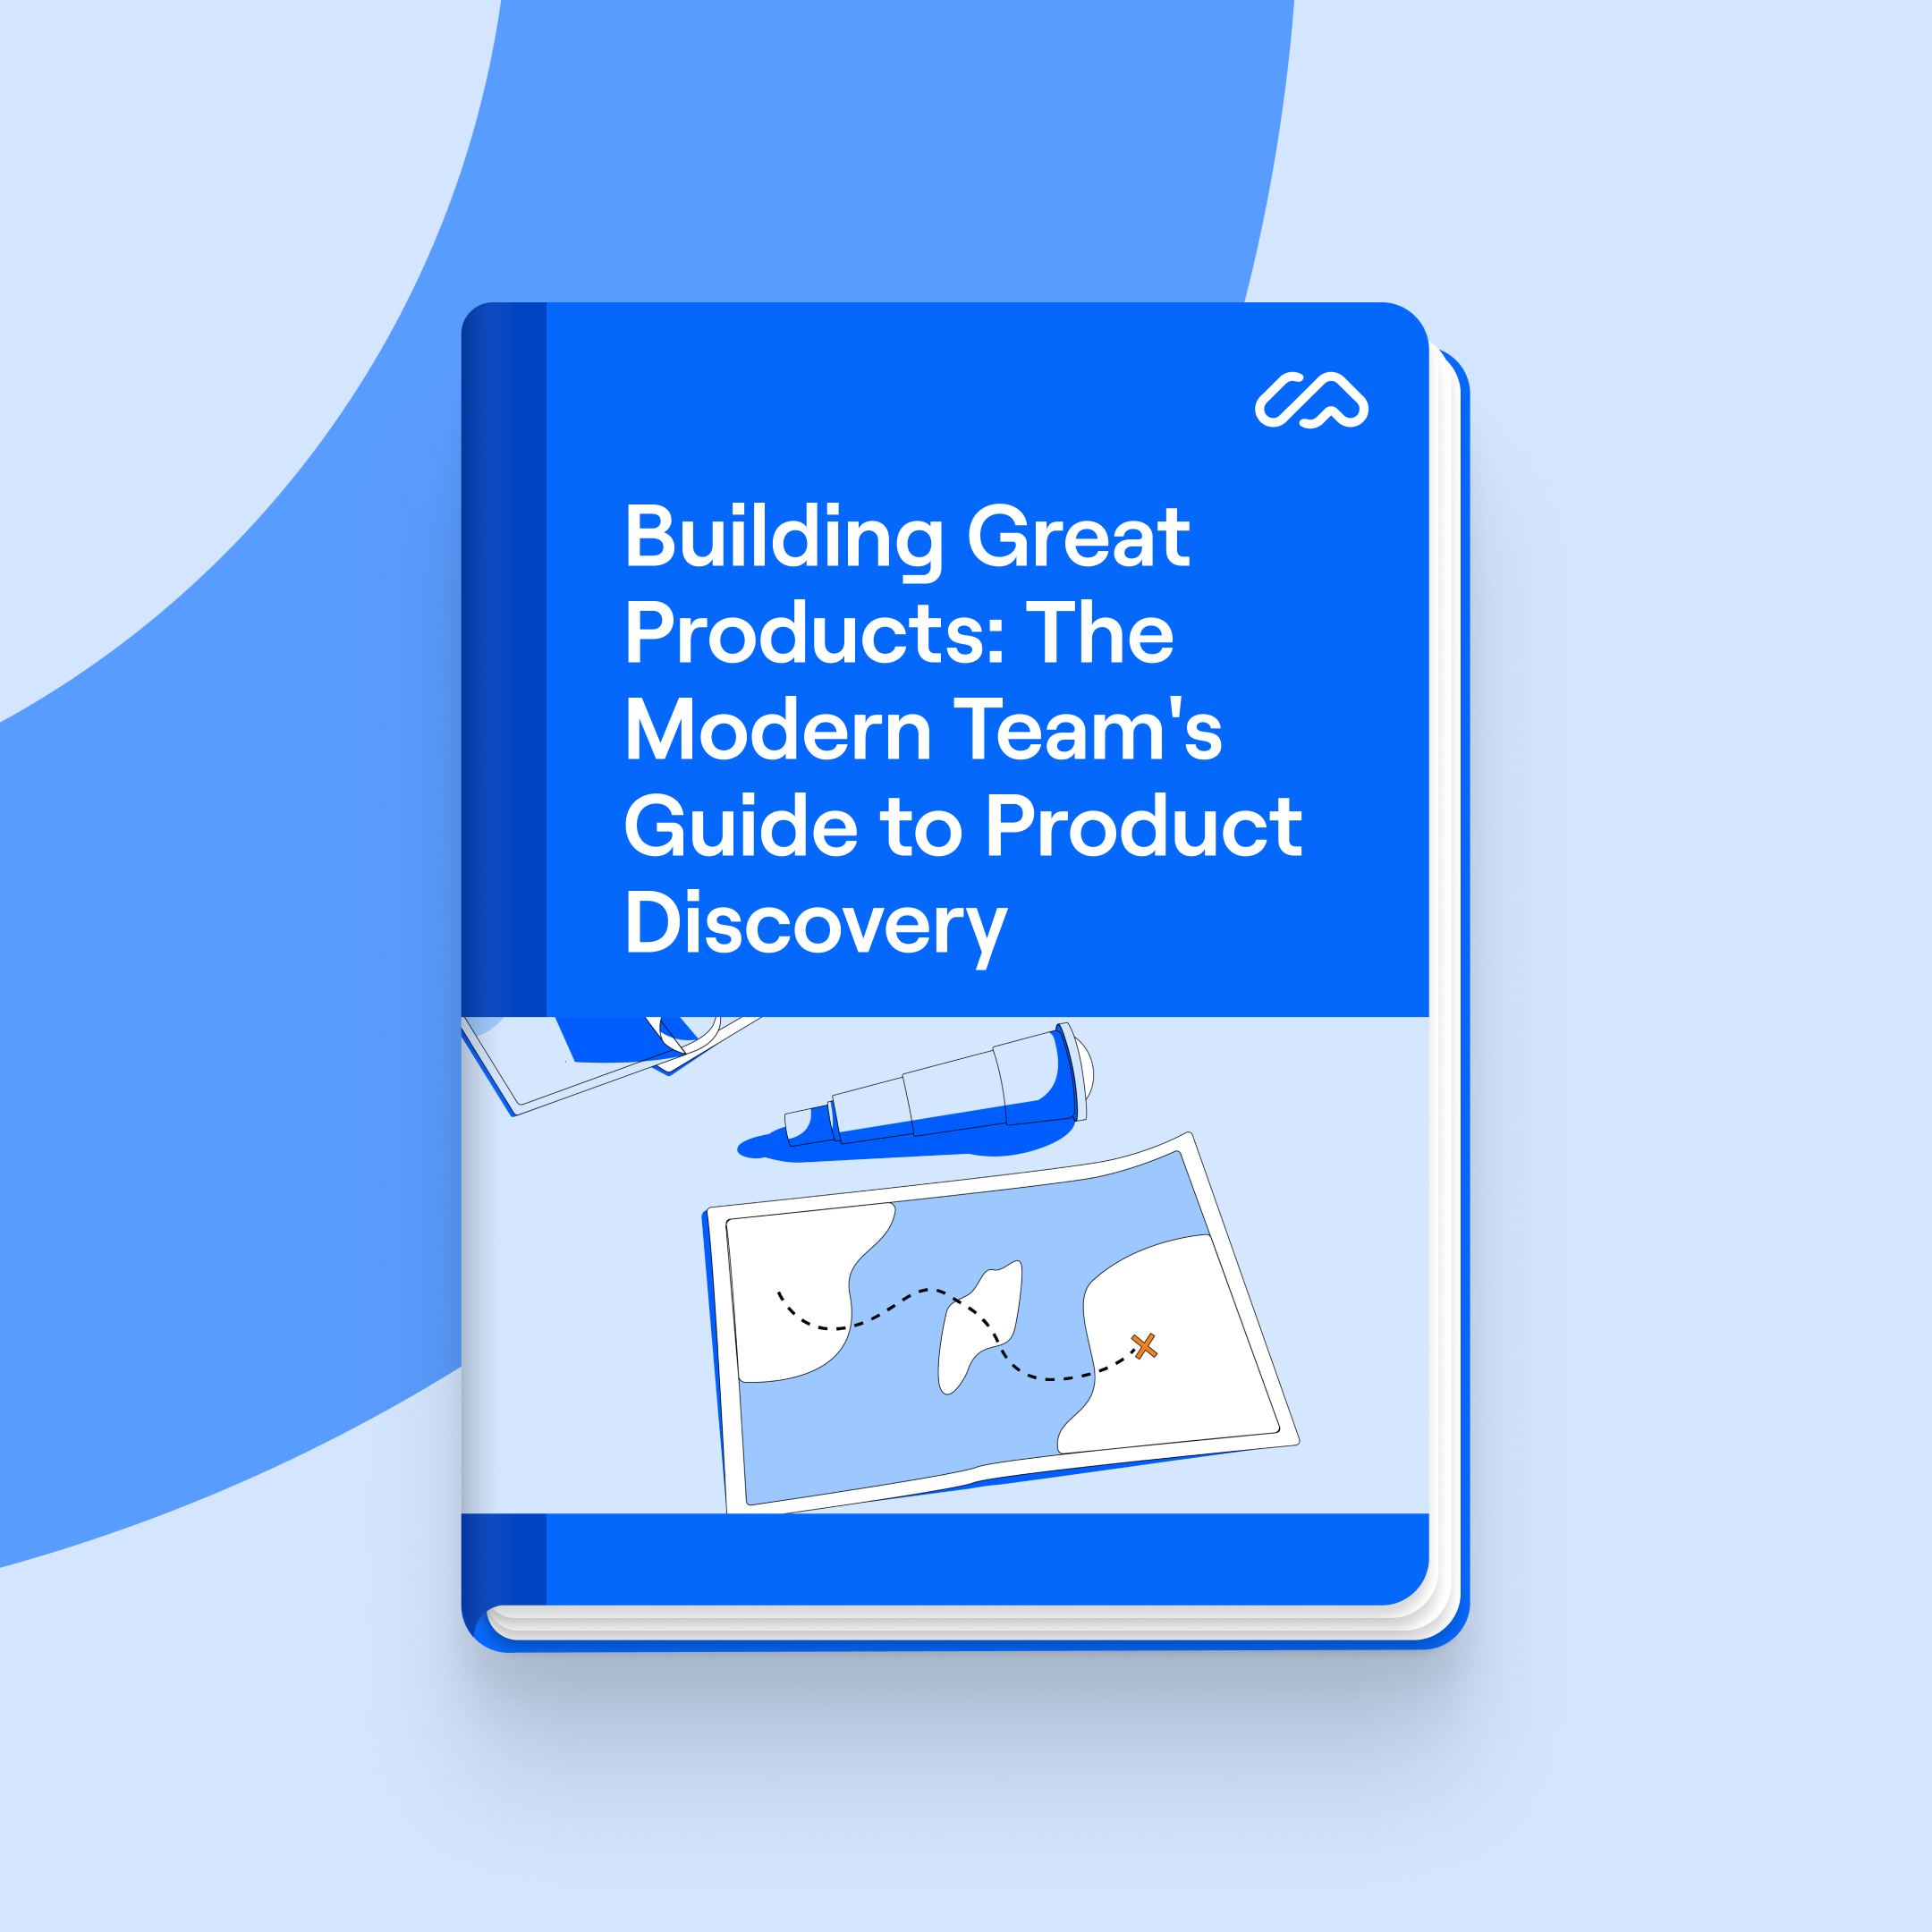 Building Great Products: The Modern Team's Guide to Product Discovery